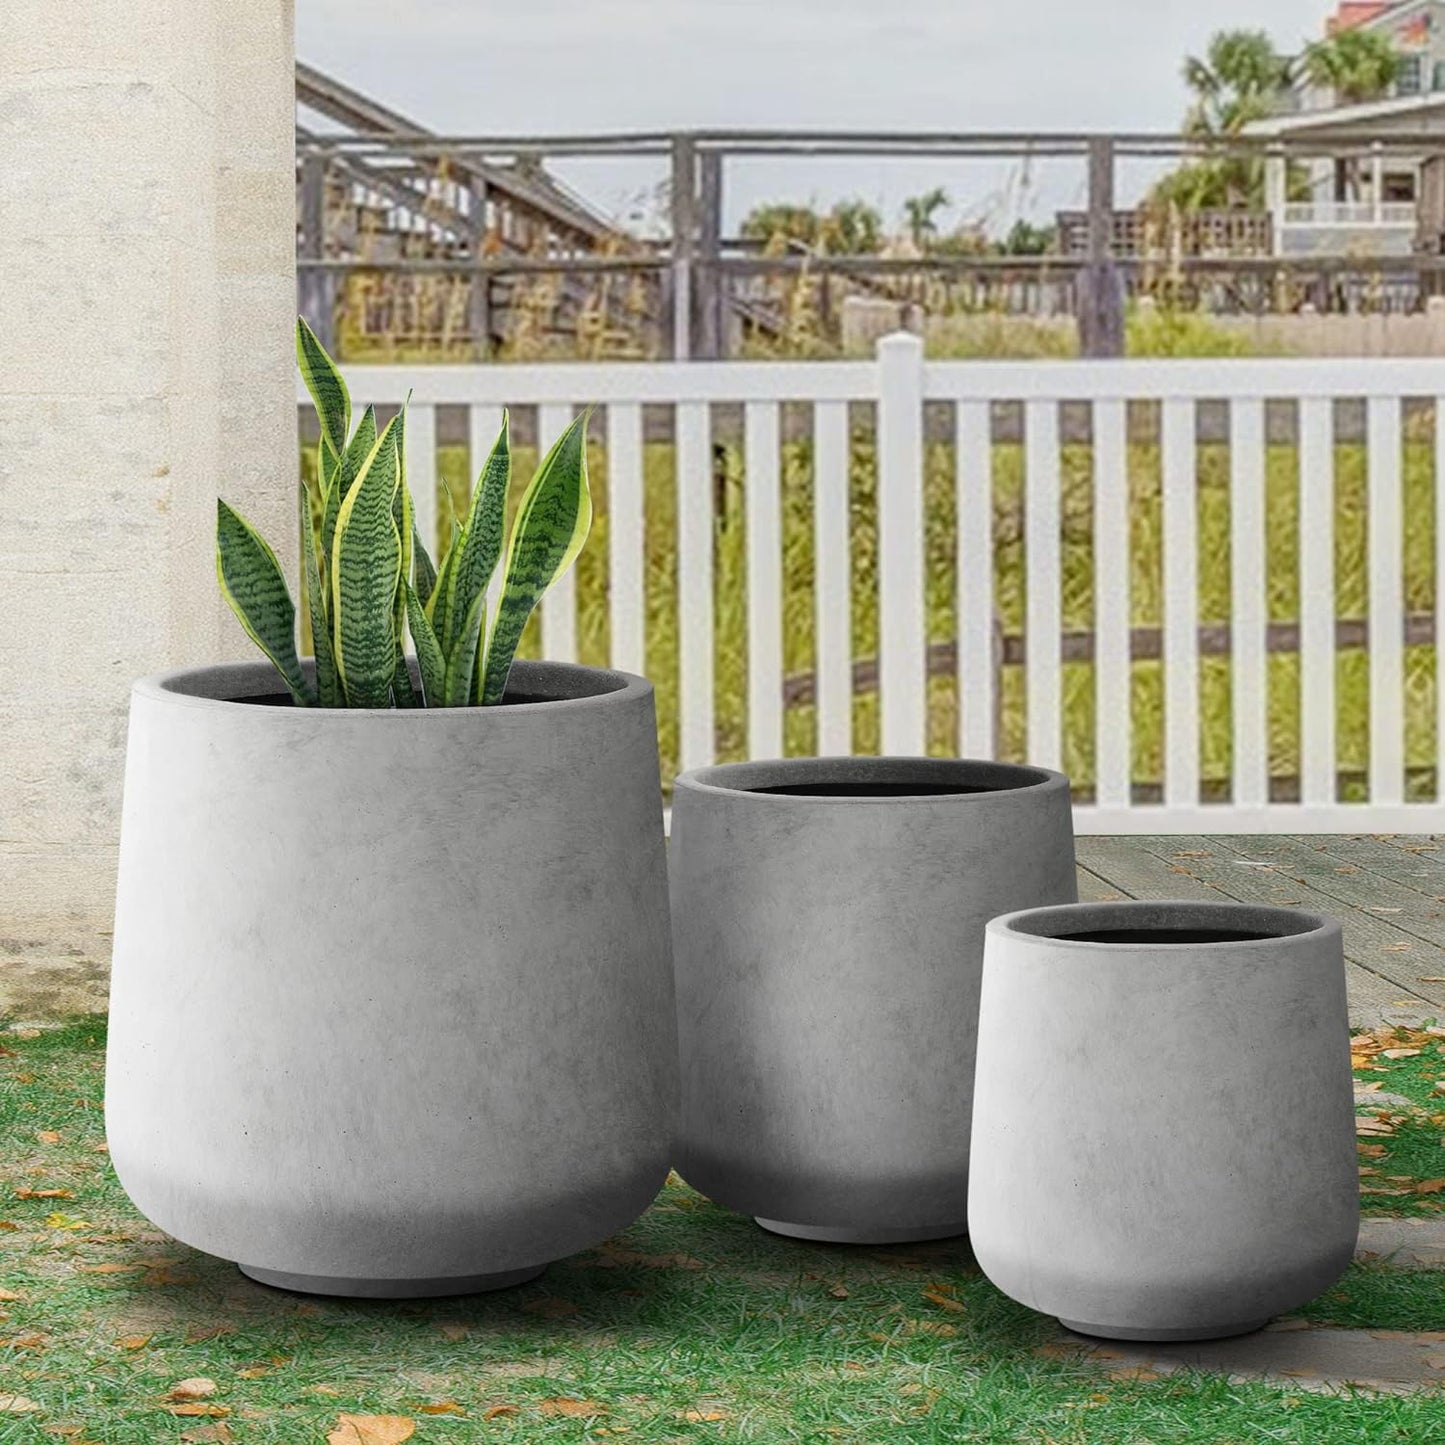 Kante 15.3"+11.6"+8.2" Dia Round Concrete Planter, Large Outdoor Indoor Planter Pots Containers with Drainage Holes and Rubber Plug for Home Garden Patio, Weathered Concrete